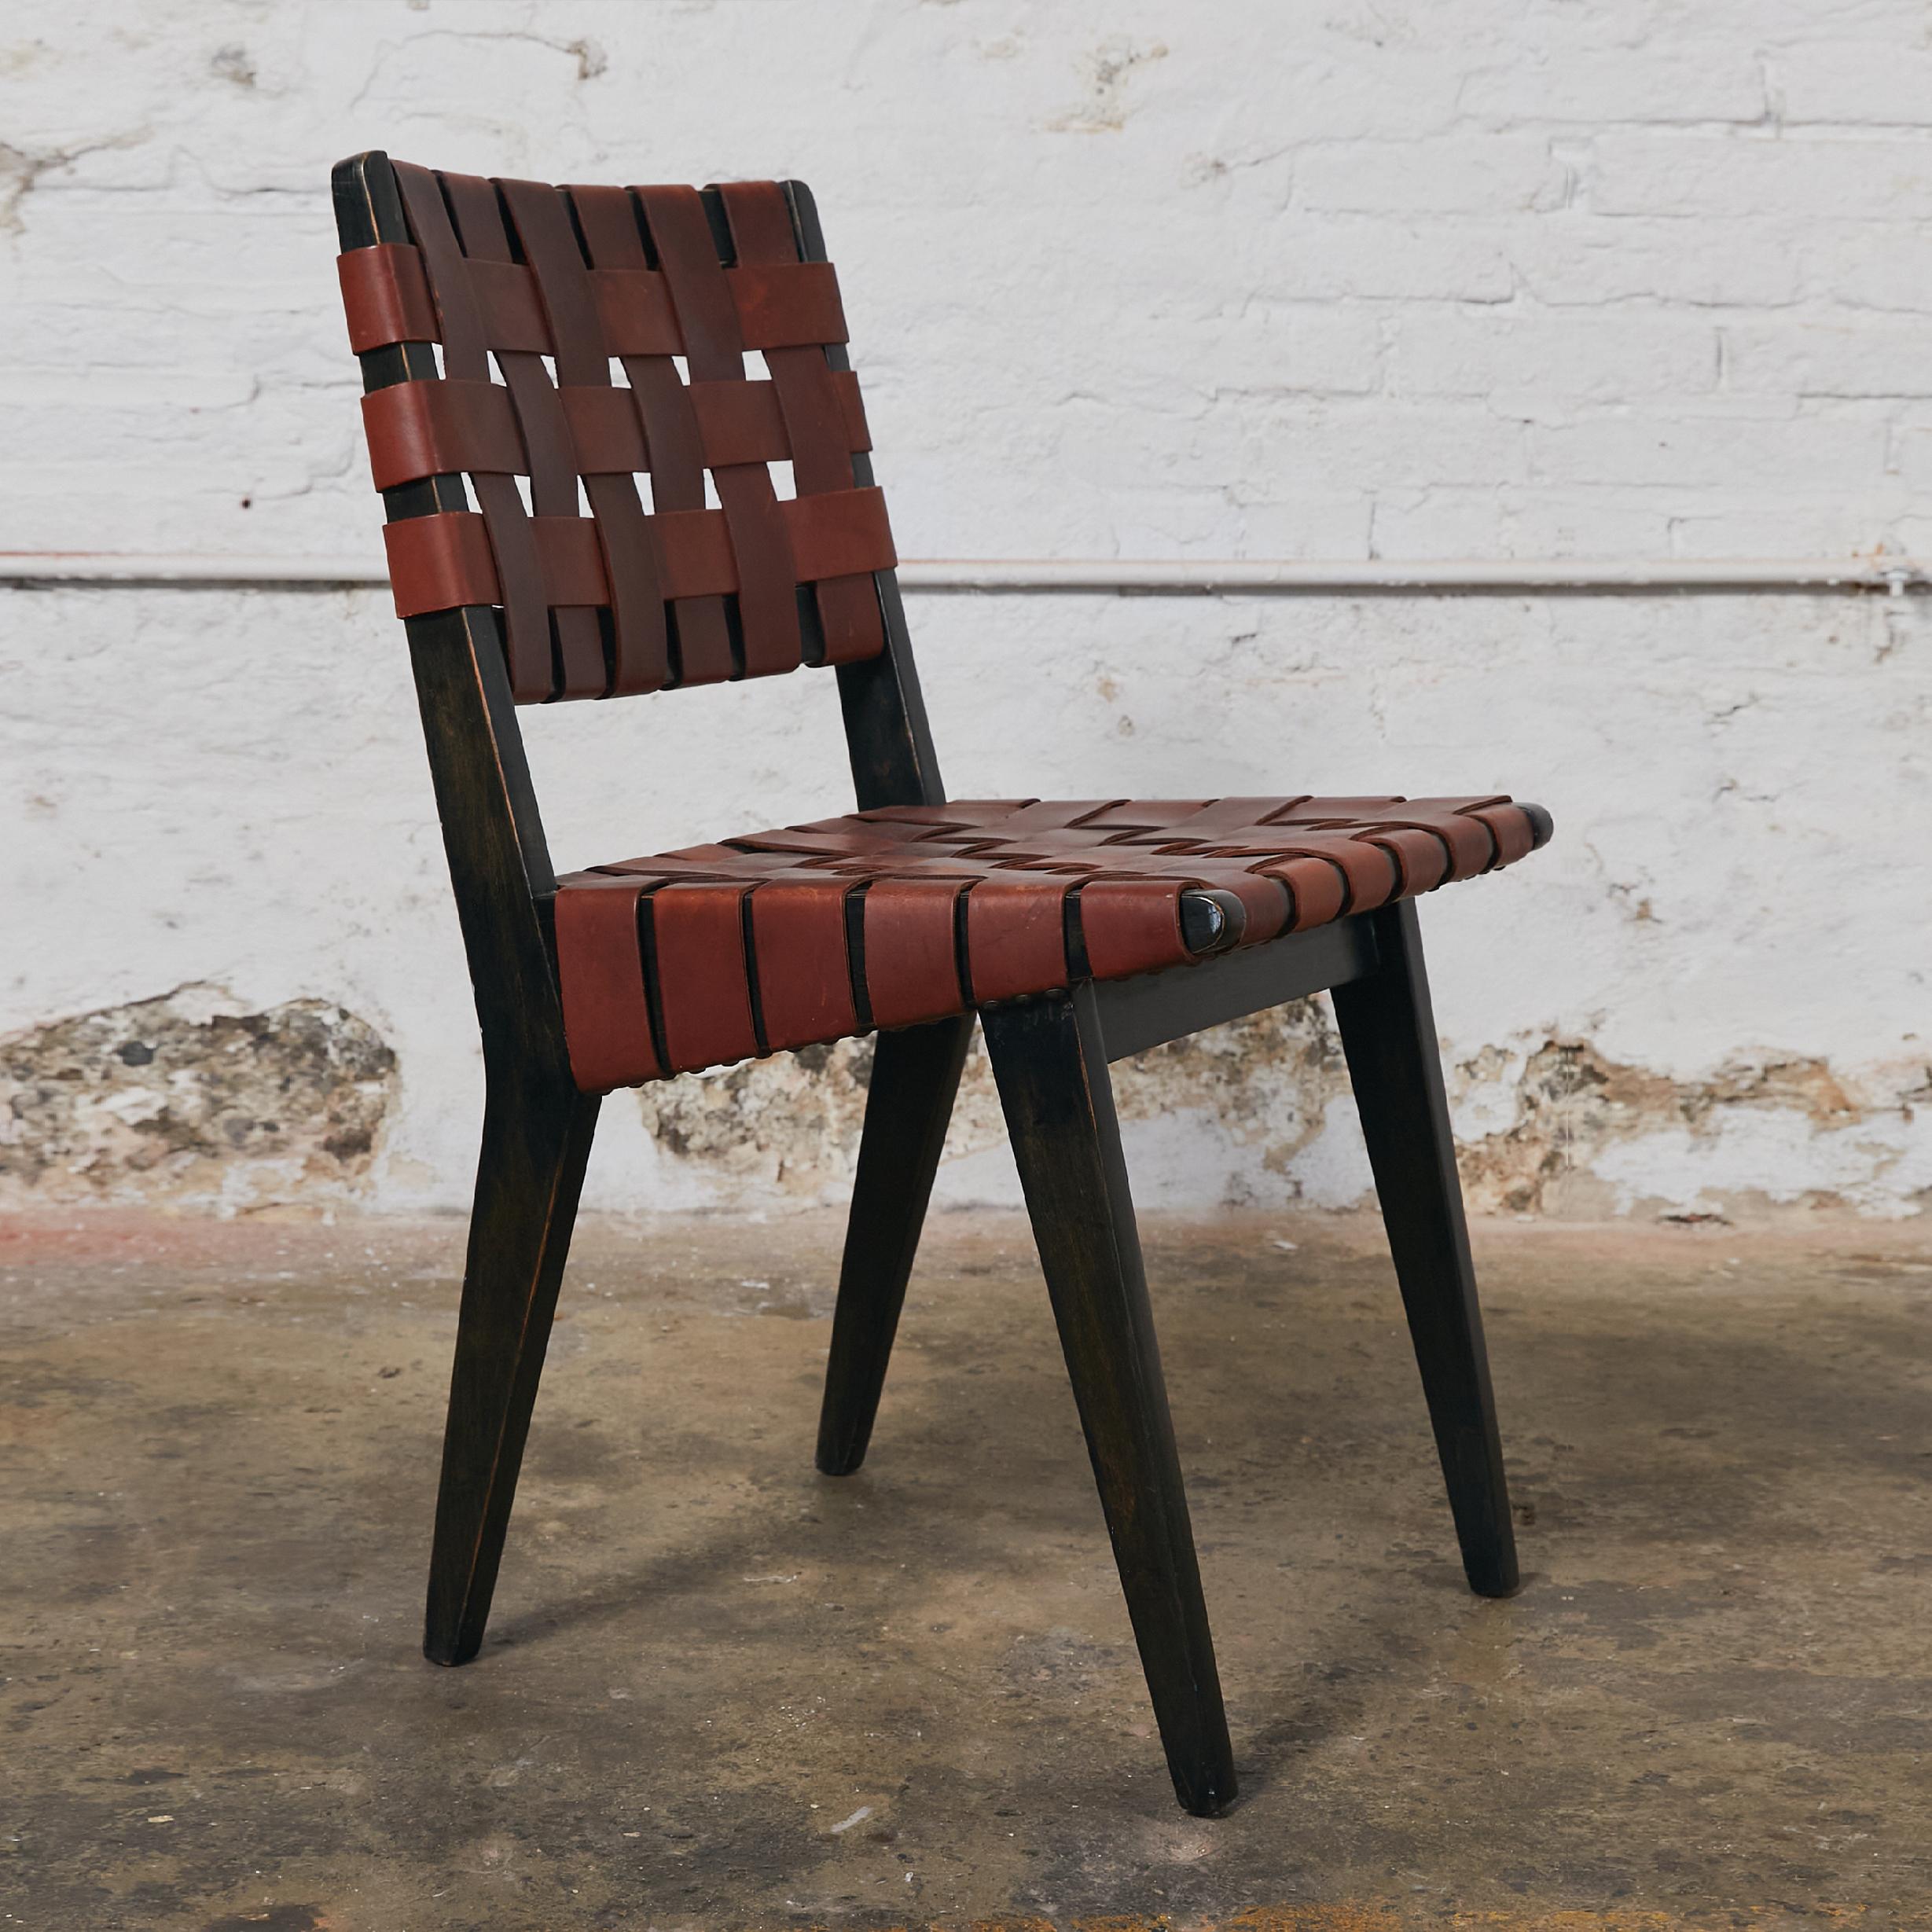 American Set of Four Chairs in the Style of Jens Risom